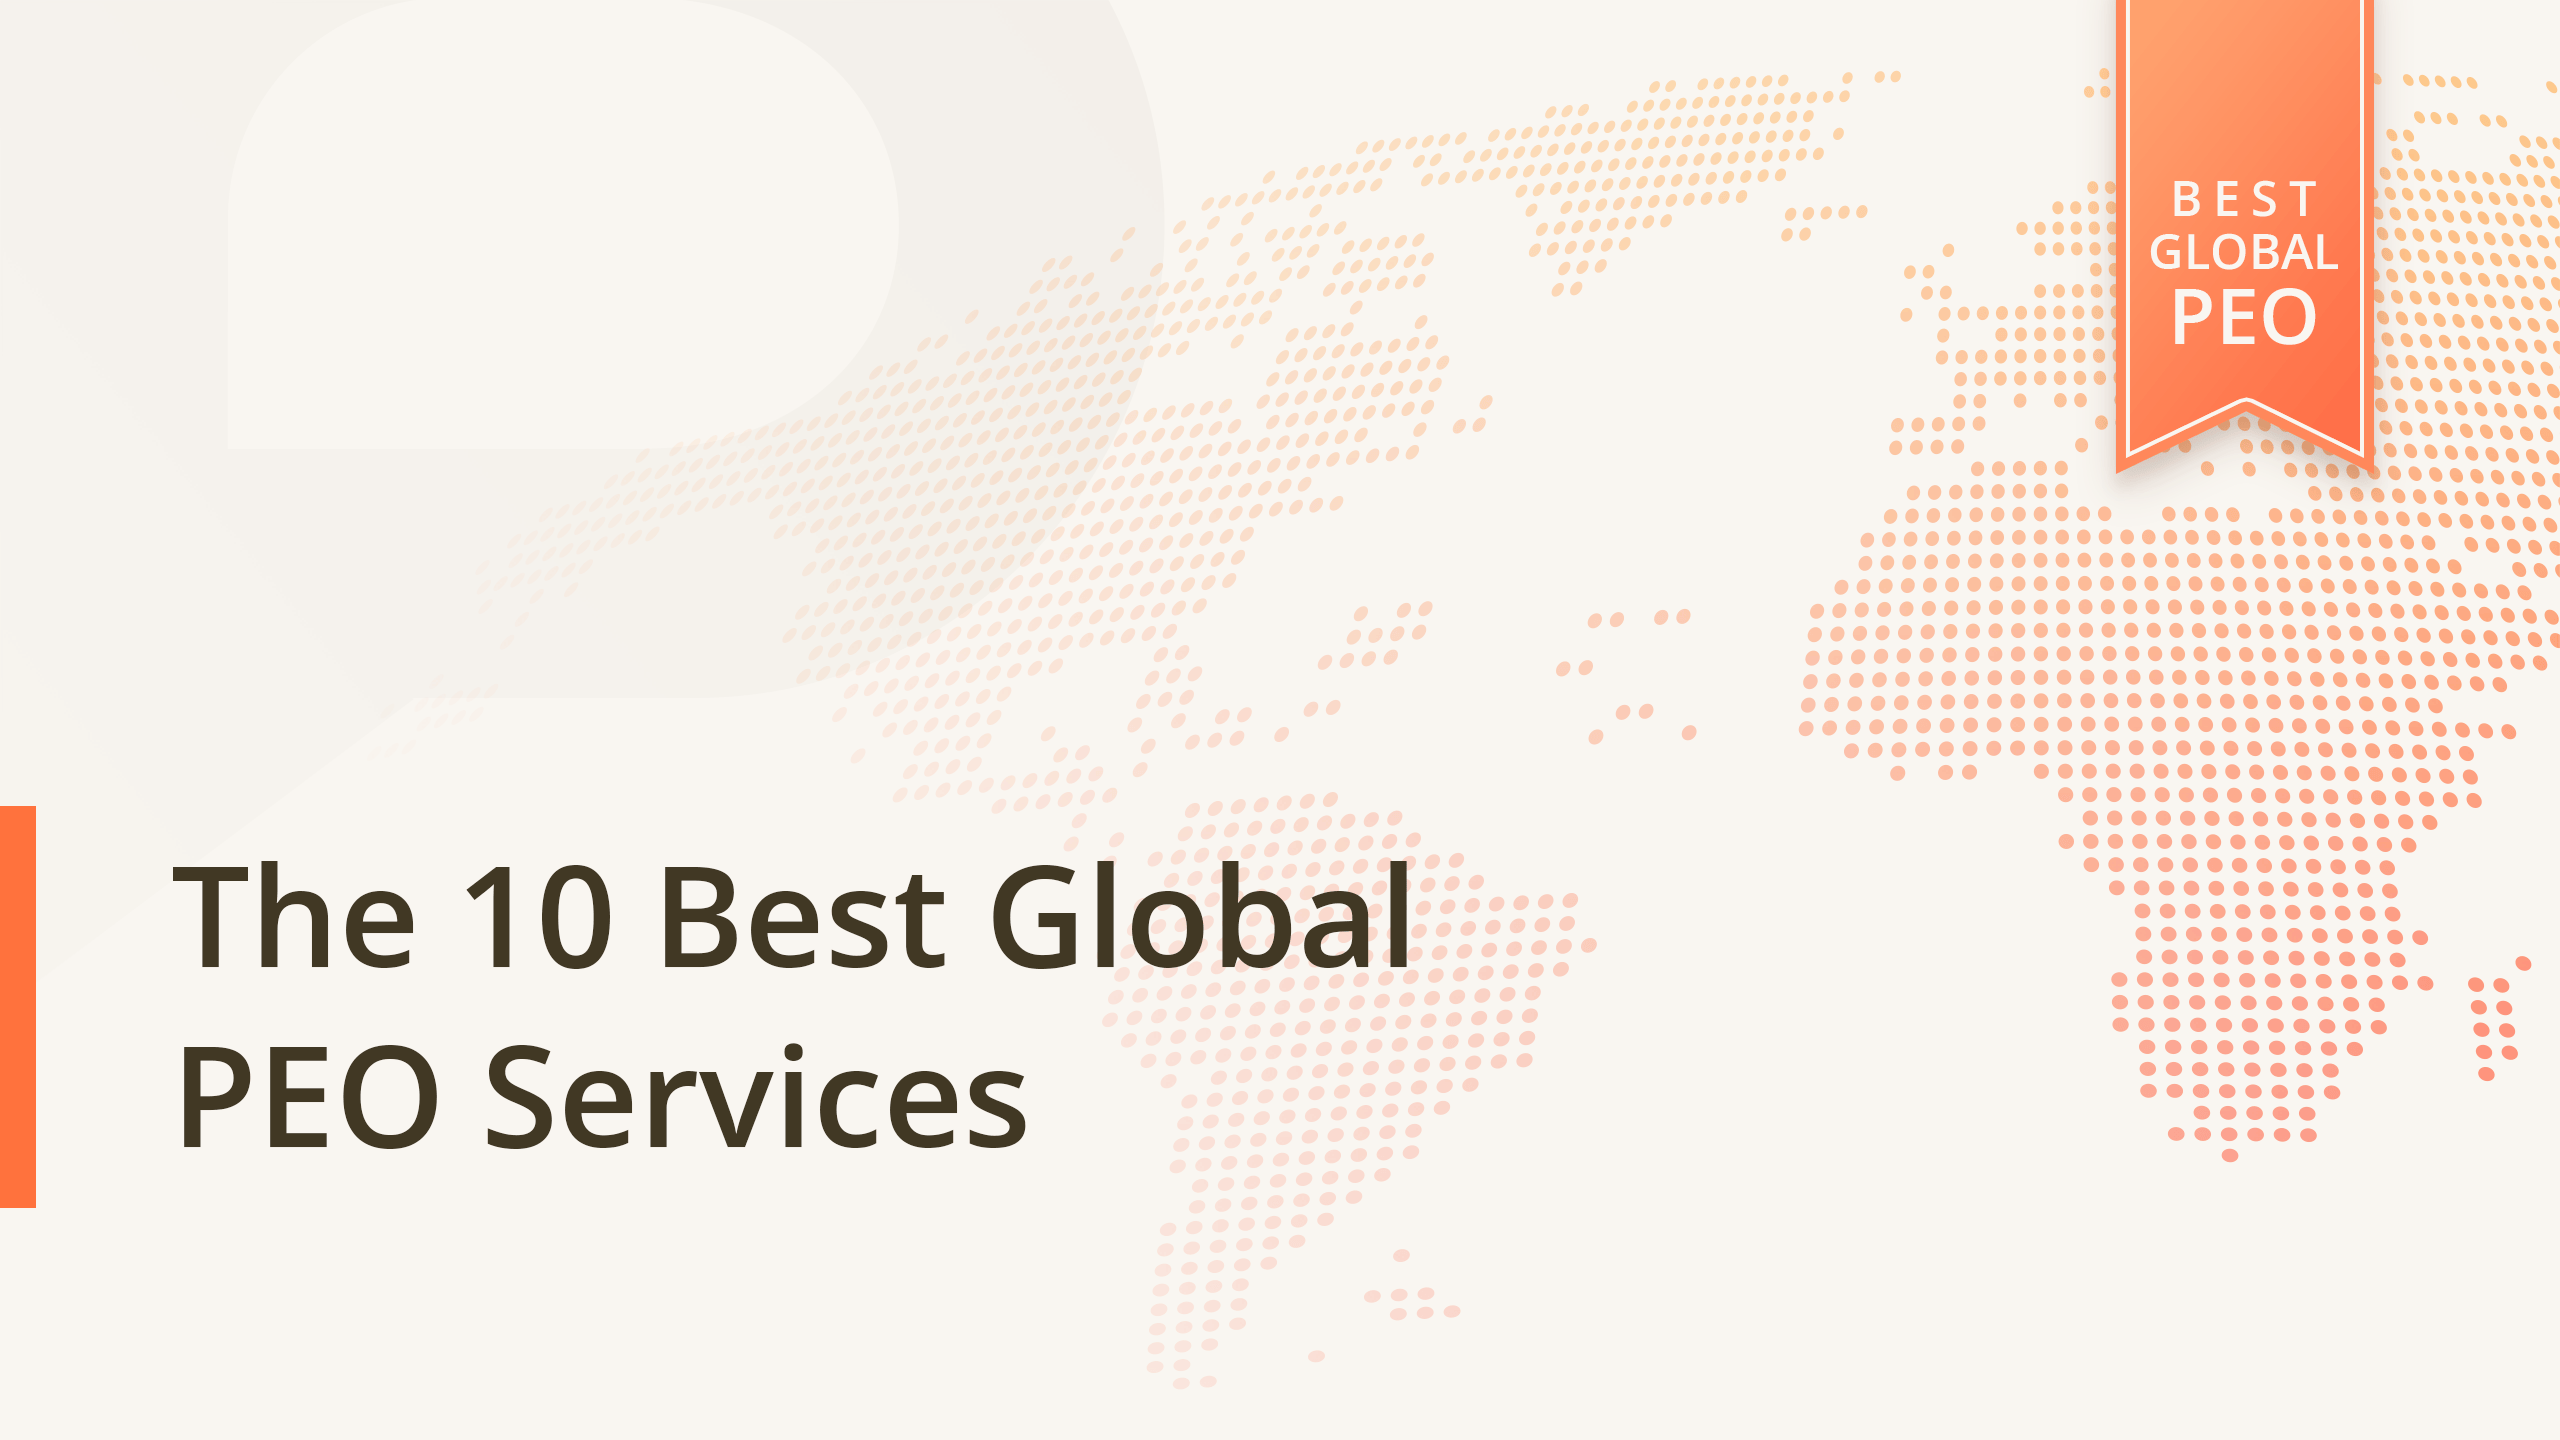 Global PEO Services